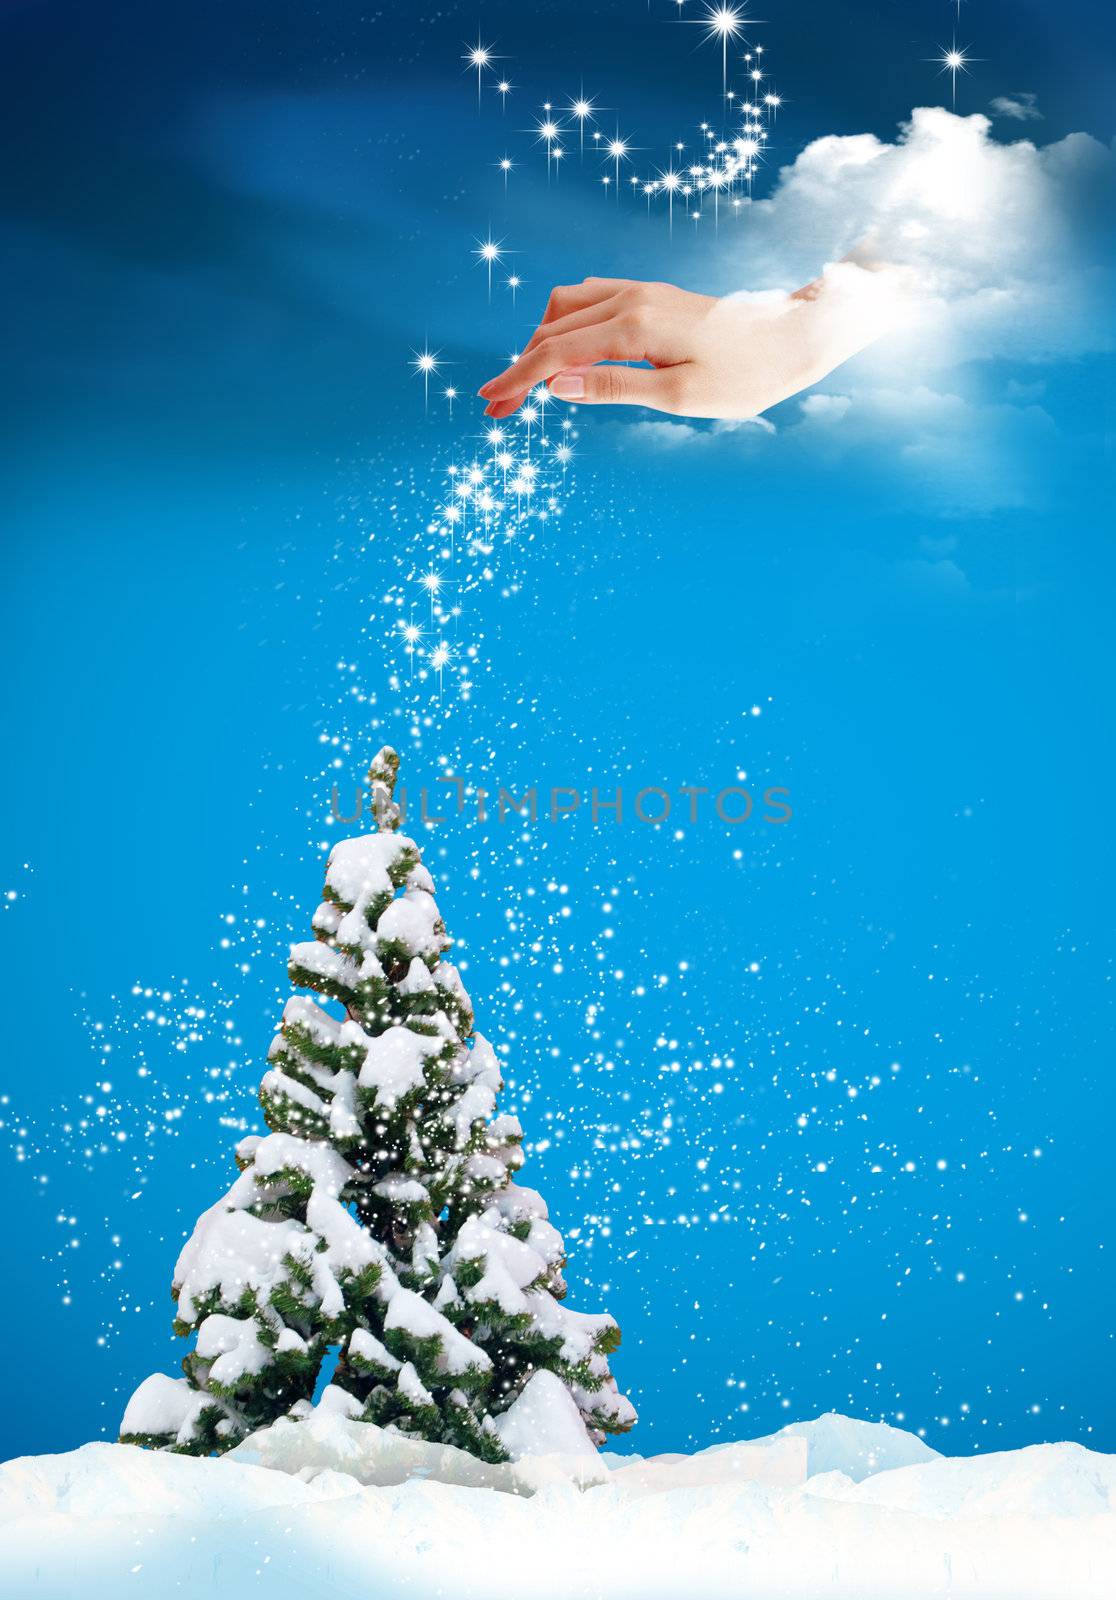 A very realistic Christmas tree under snowing stars